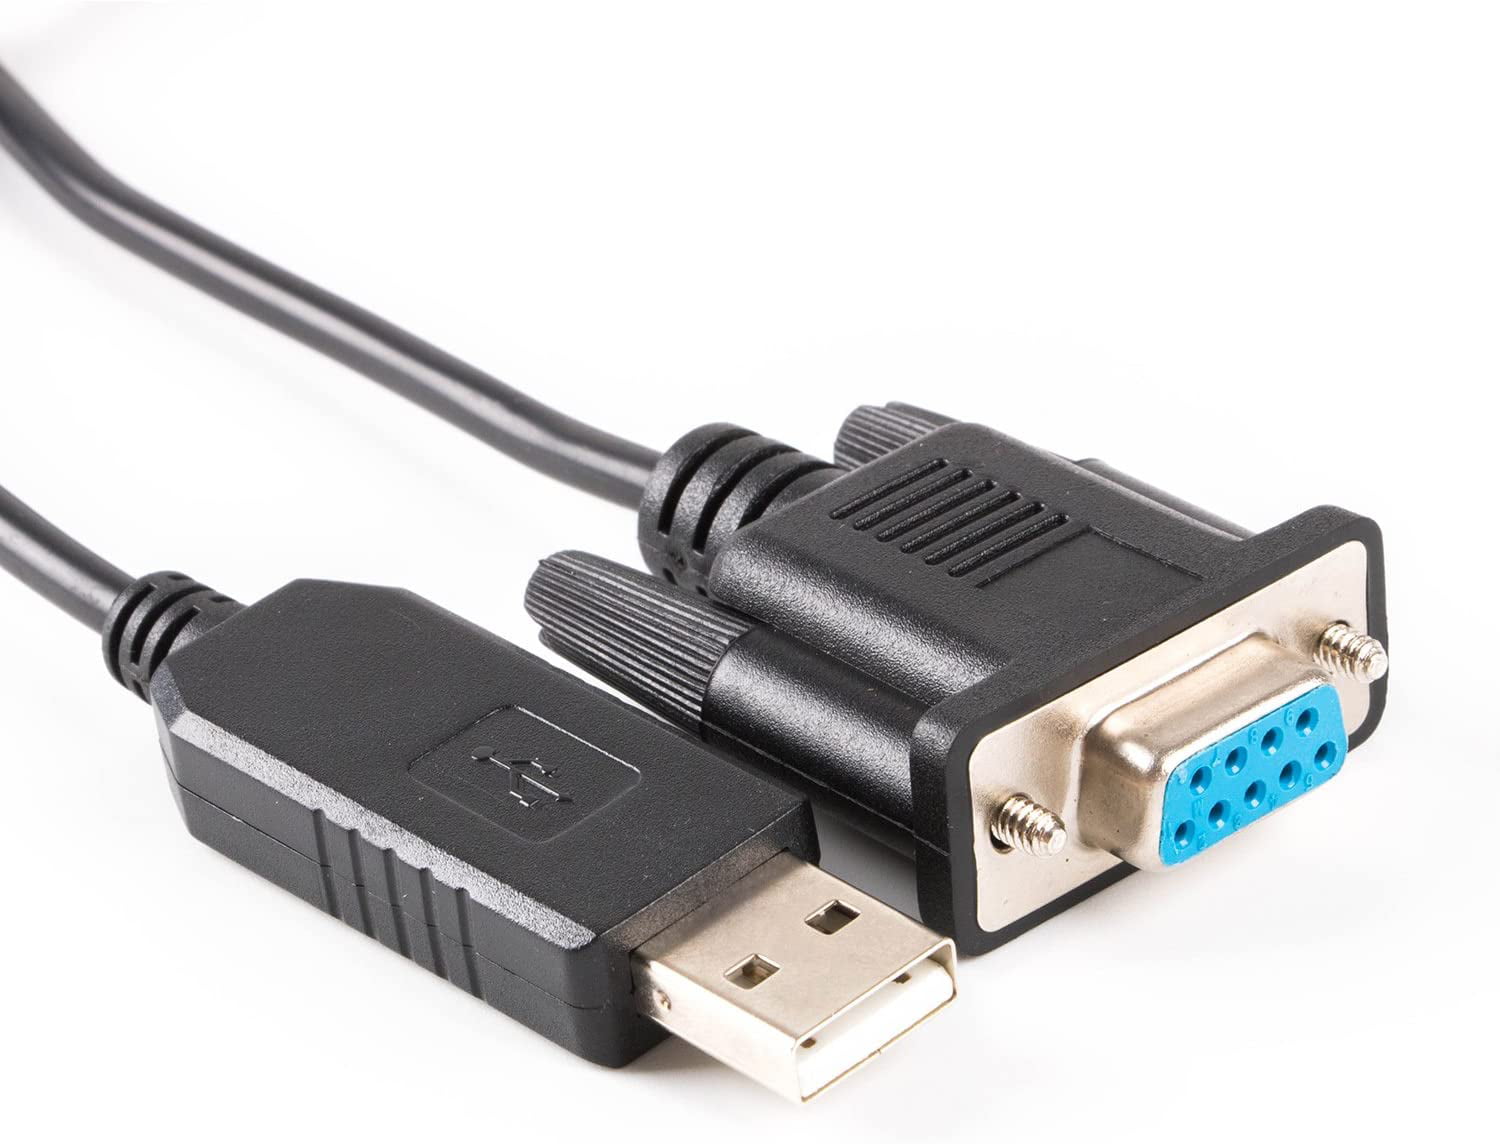 PL2303TA USB RS232 to DB9 Cross Wired Rollover Null Modem Cable (Null Modem pinout: 3-RXD 5-GND, 7-CTS. 8-RT) - Walmart.com